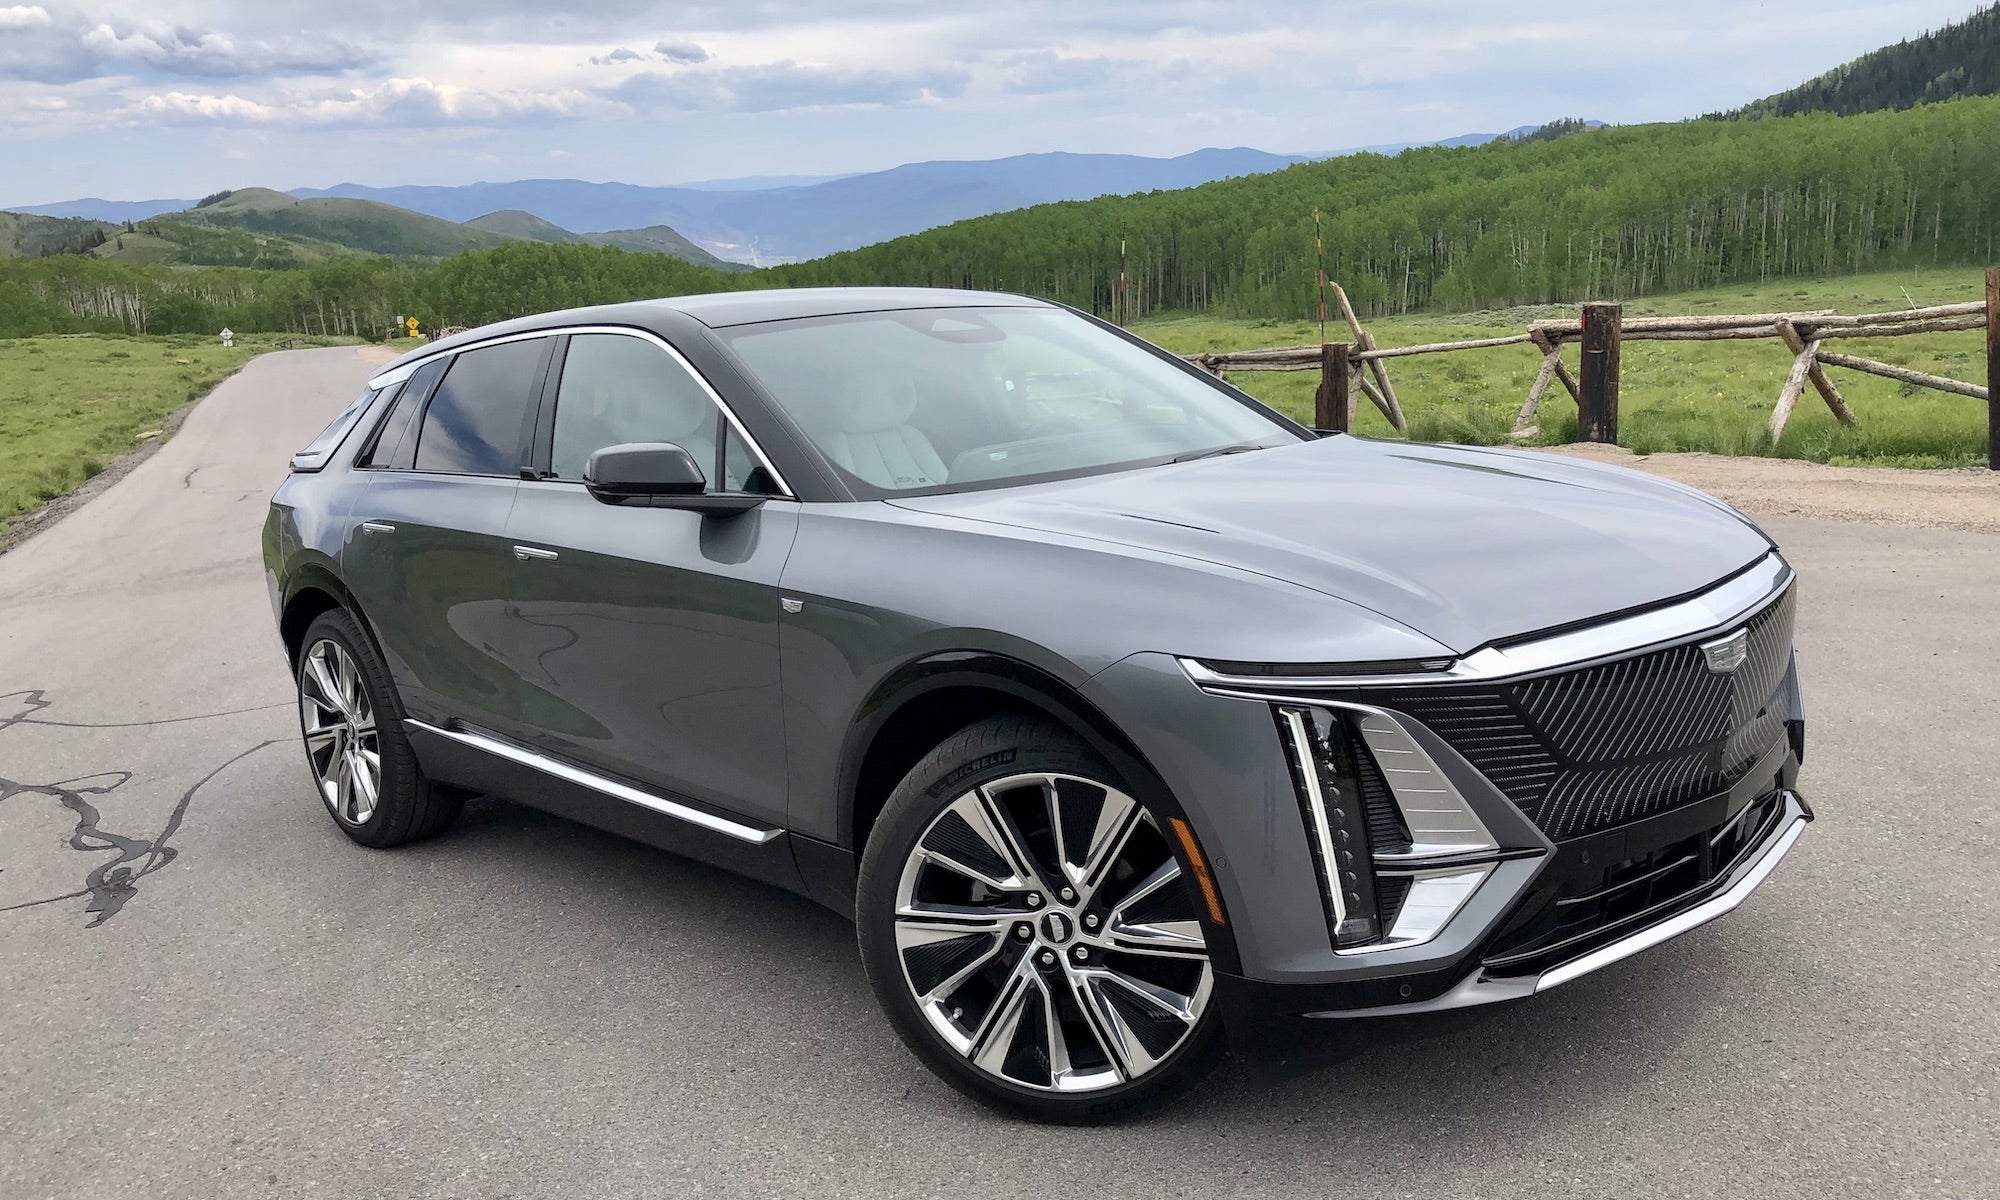 The Cadillac Lyriq EV: Specific style and design and a quiet cabin